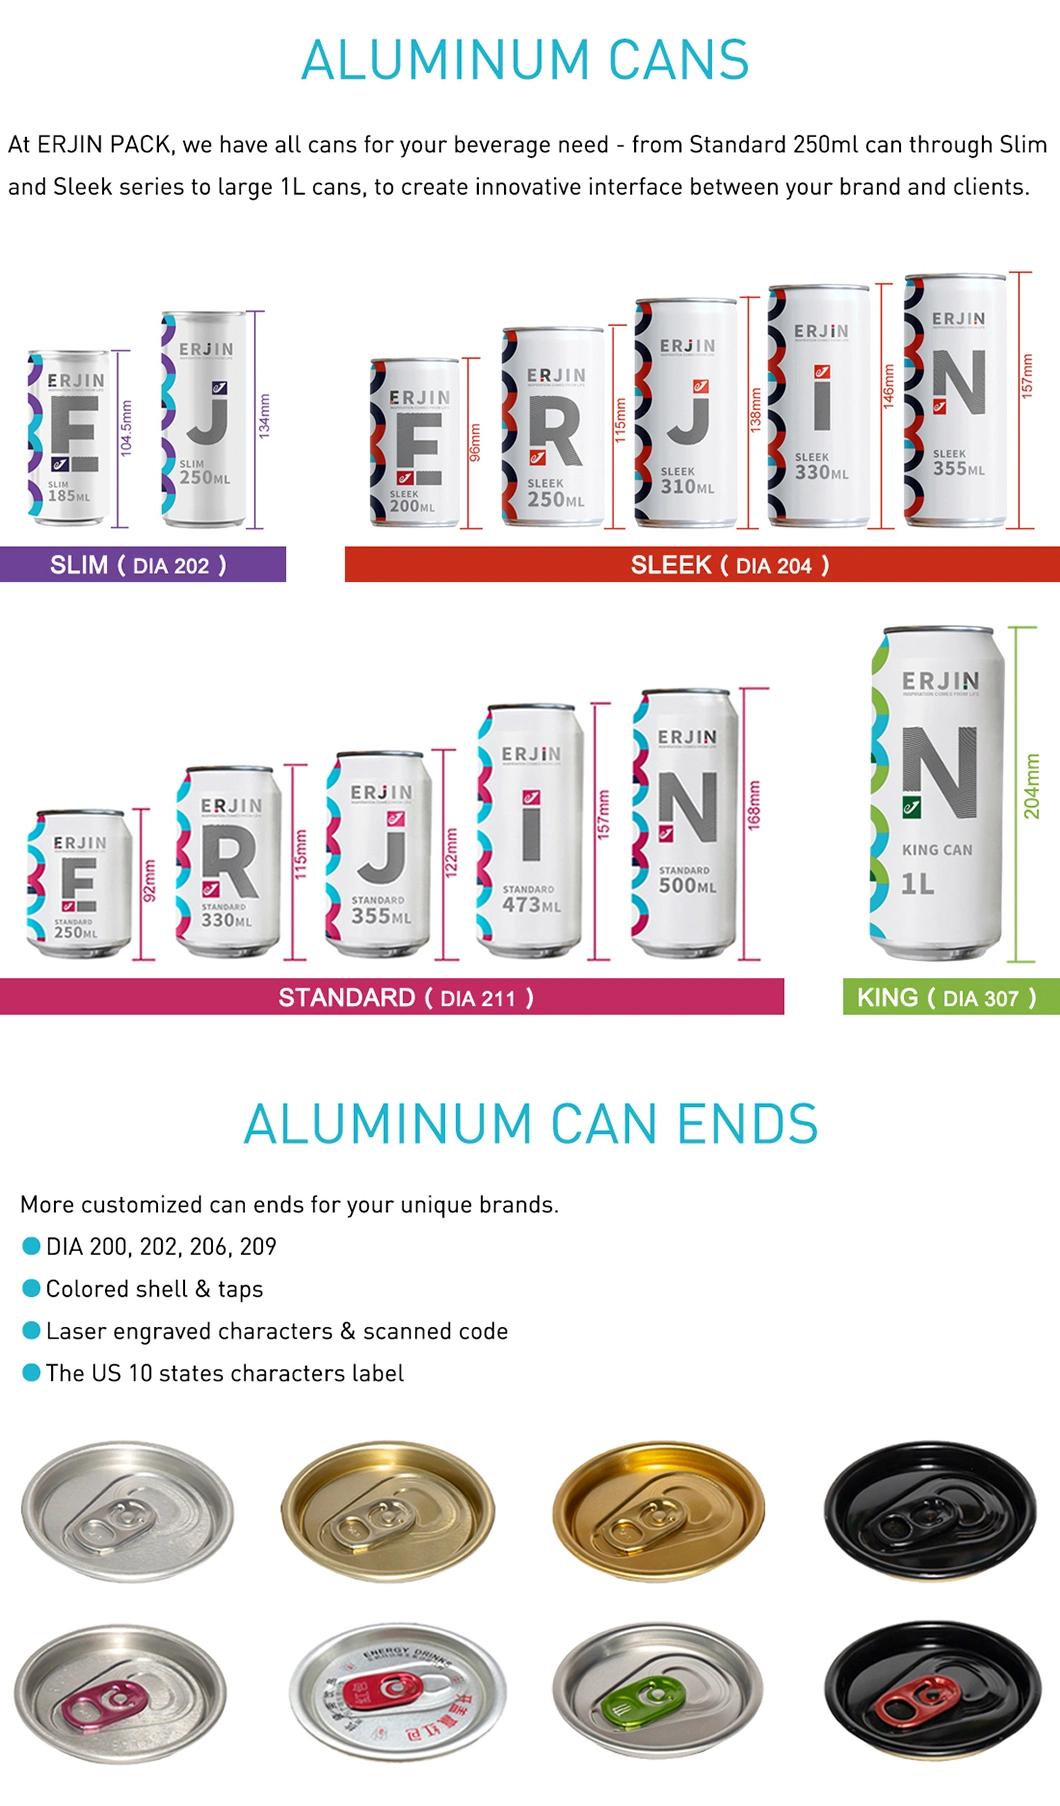 Standard 250ml Aluminum Cans with Ends for Energy Drink